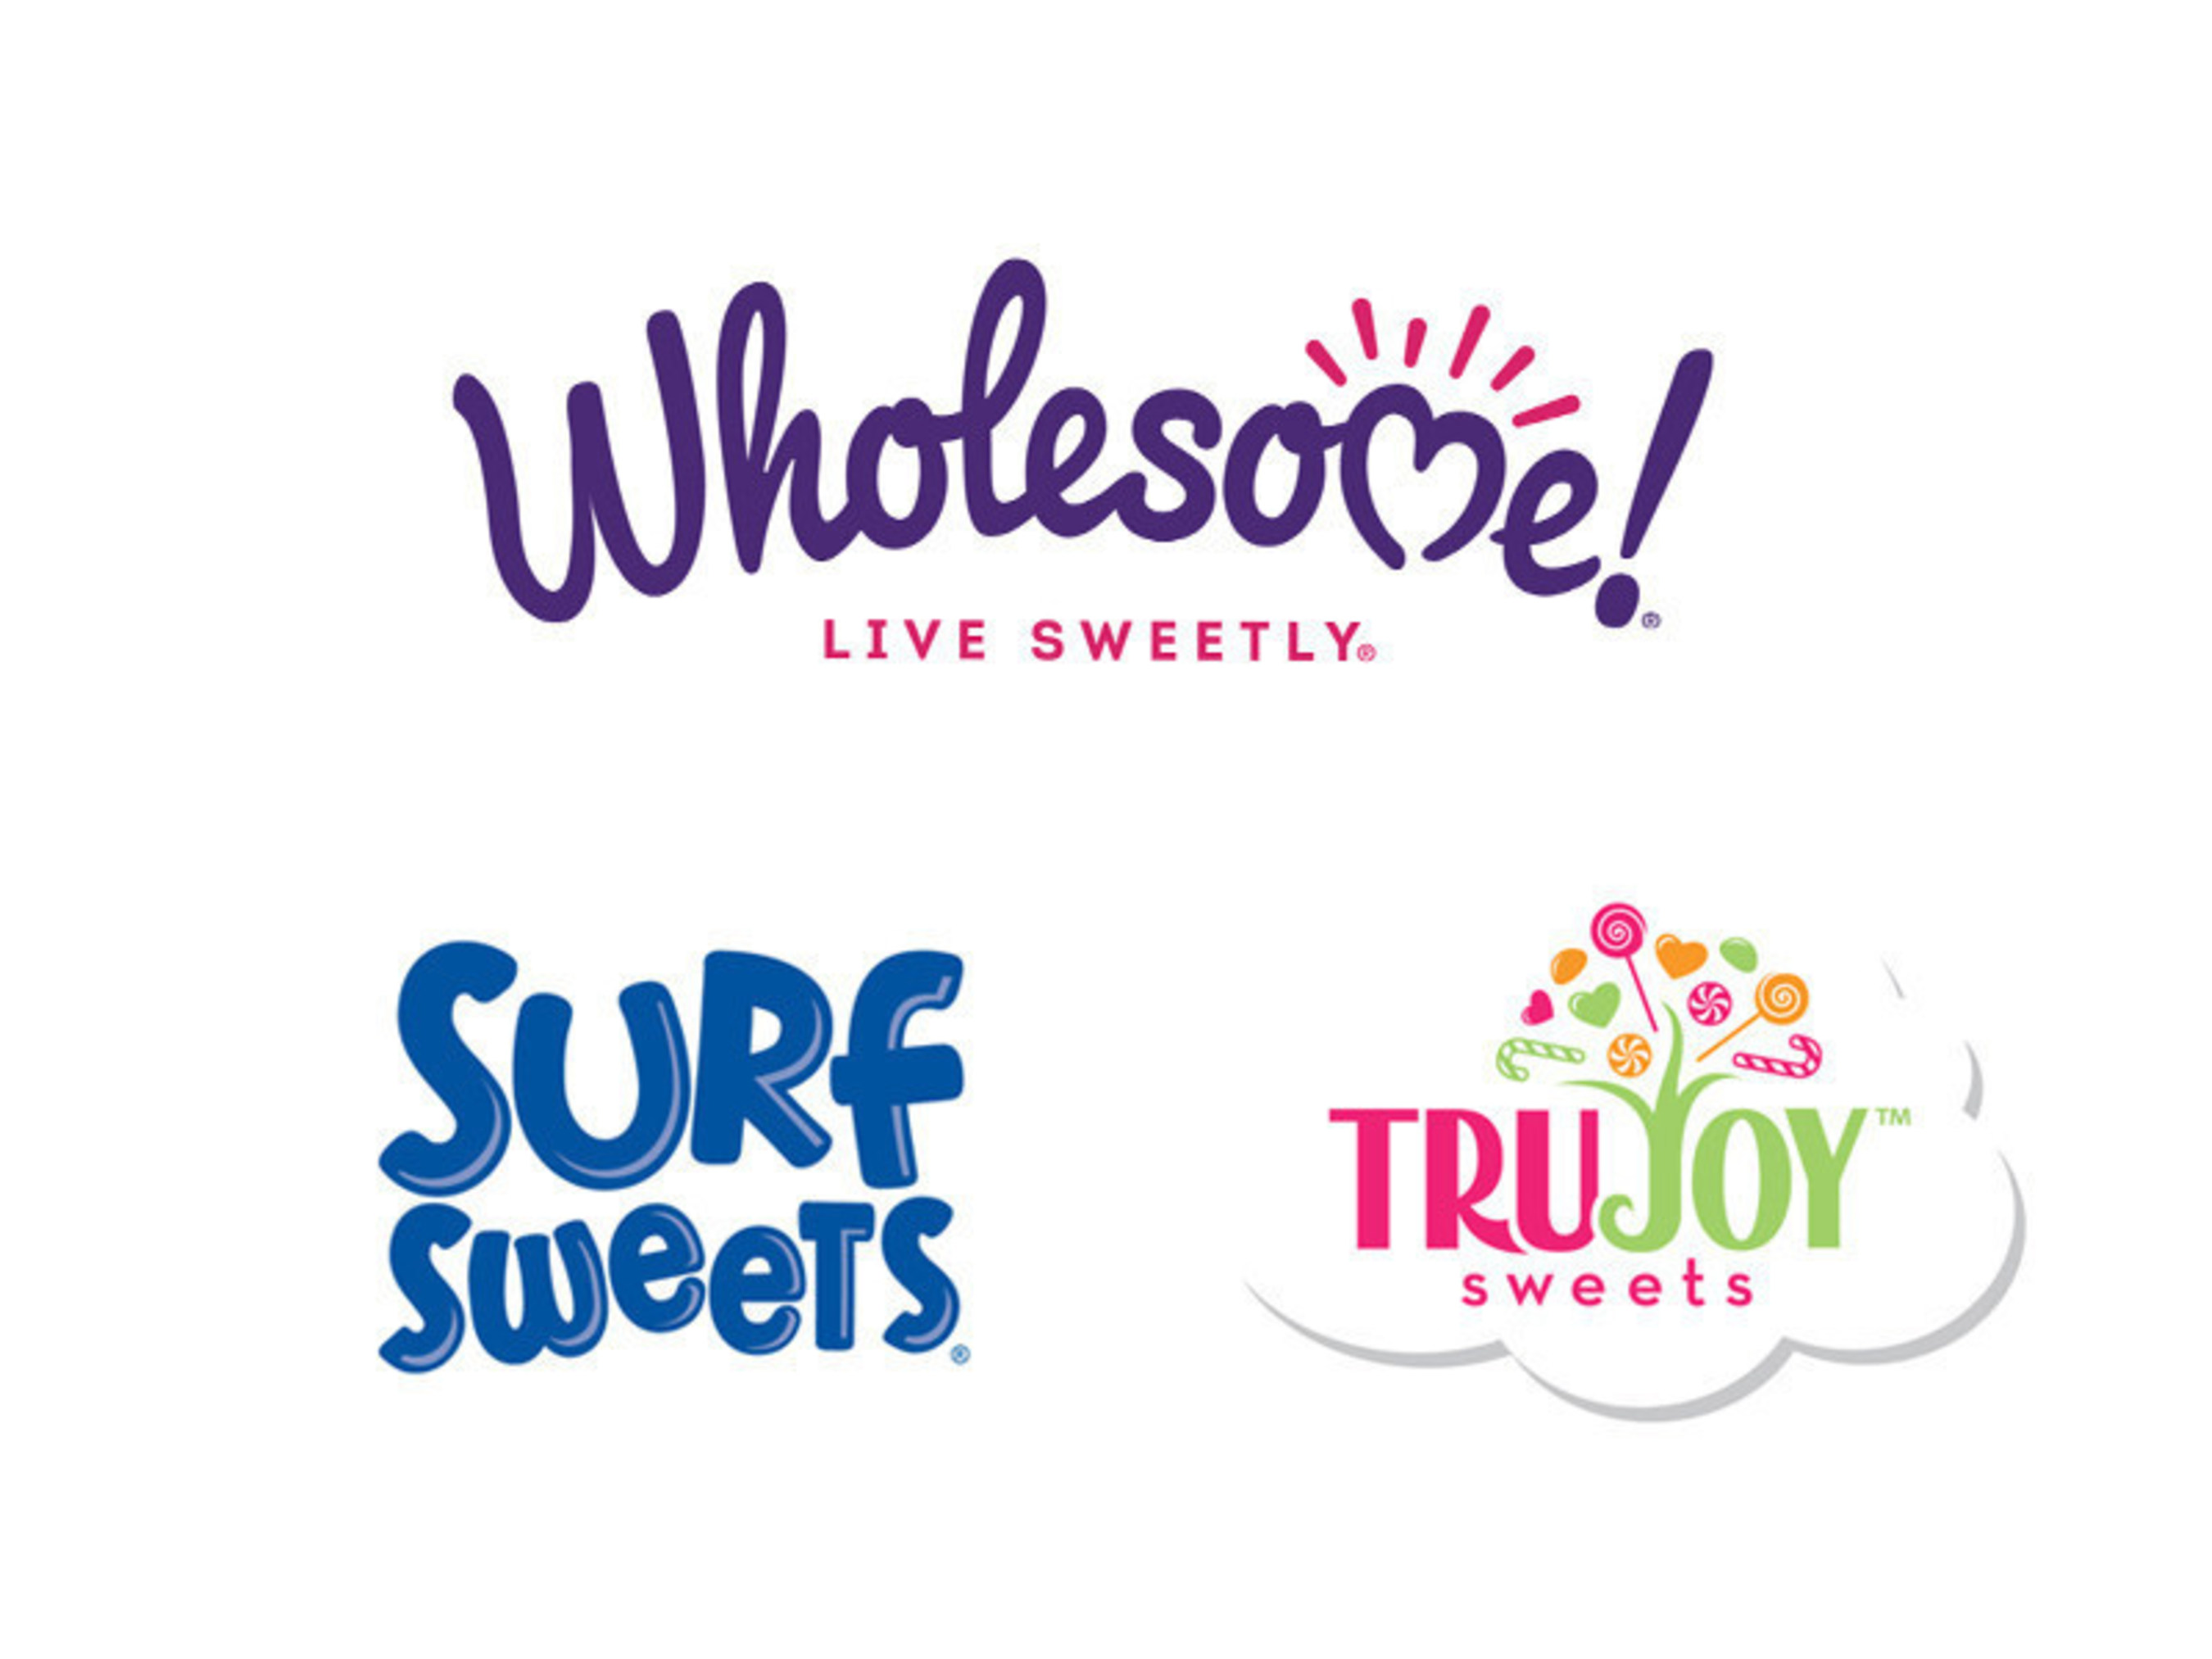 With the modern family constantly on-the-go, Wholesome! and Surf Sweets brands are introducing timesaving yet craveworthy items to their popular product lines. Wholesome! is the nation's leader in Fair Trade organic sugars and other sweeteners, while Surf Sweets is a leading supplier of allergy free candy and the number one supplier of natural Gummy Bears, Gummy Worms and Organic Jelly Beans. Experts in all things sweet, both brands will be sampling their newest items, along with sister organic candy brand TruJoy Sweets, at Natural Products Expo East (Booth #1317), September 22-24 in Baltimore, MD.